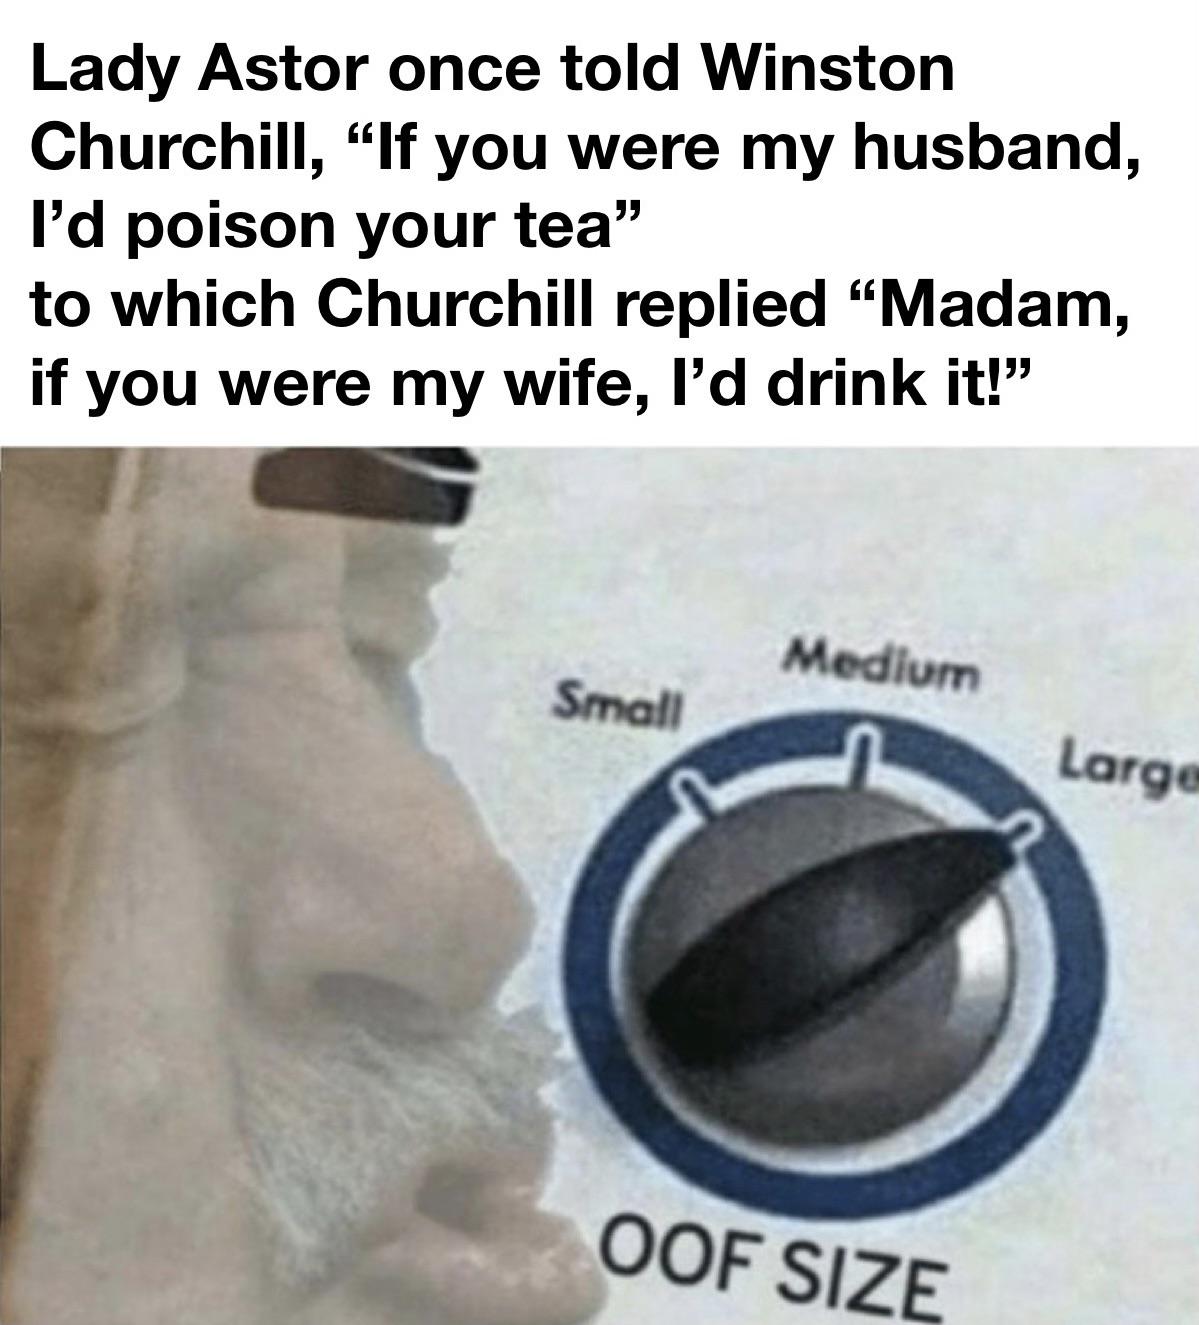 funny memes - big oof meme - Lady Astor once told Winston Churchill, "If you were my husband, I'd poison your tea" to which Churchill replied Madam, if you were my wife, I'd drink it! Medium Small Large Oof Size